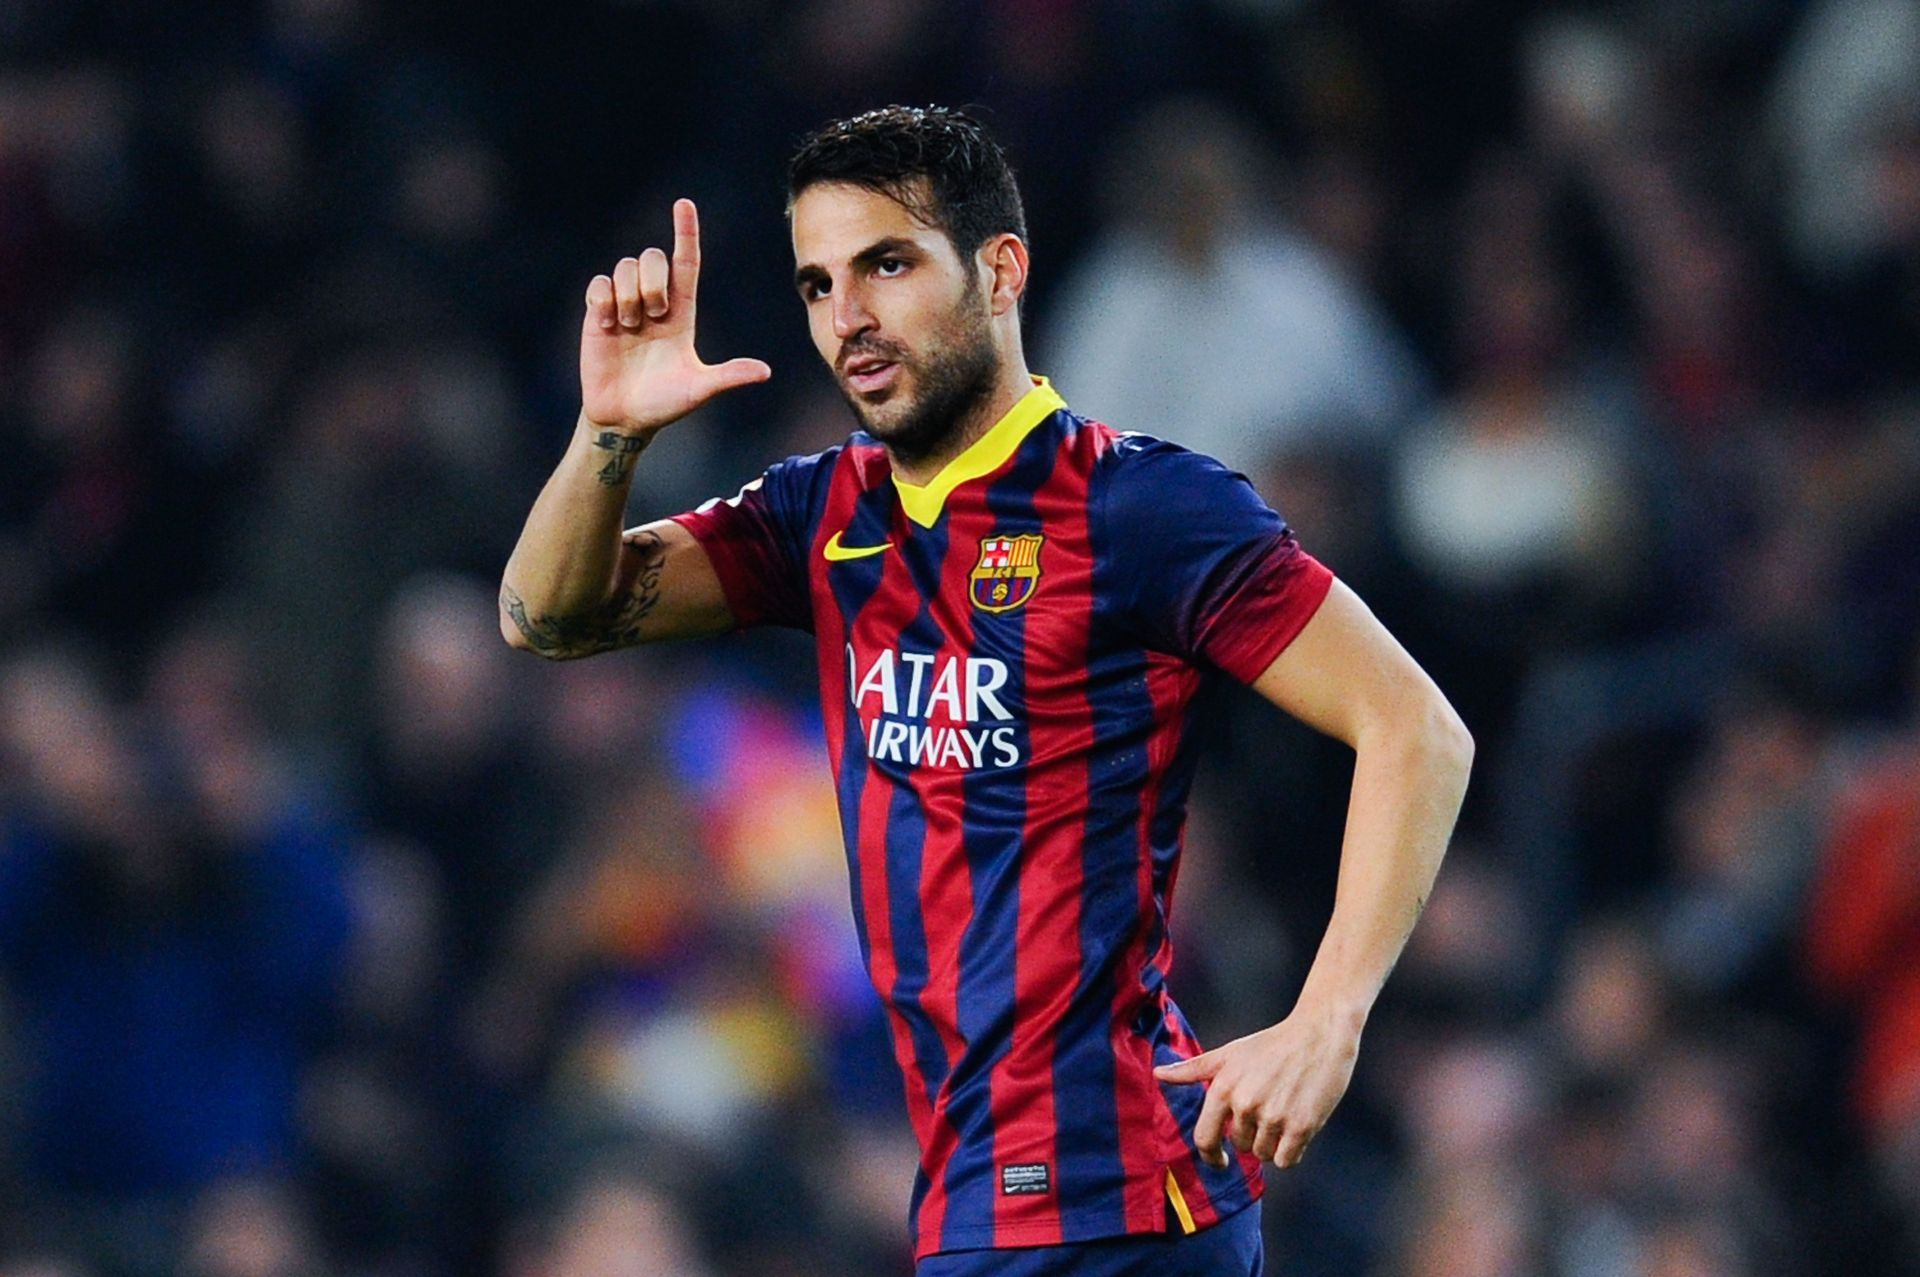 Fabregas has played for both Chelsea and Barcelona